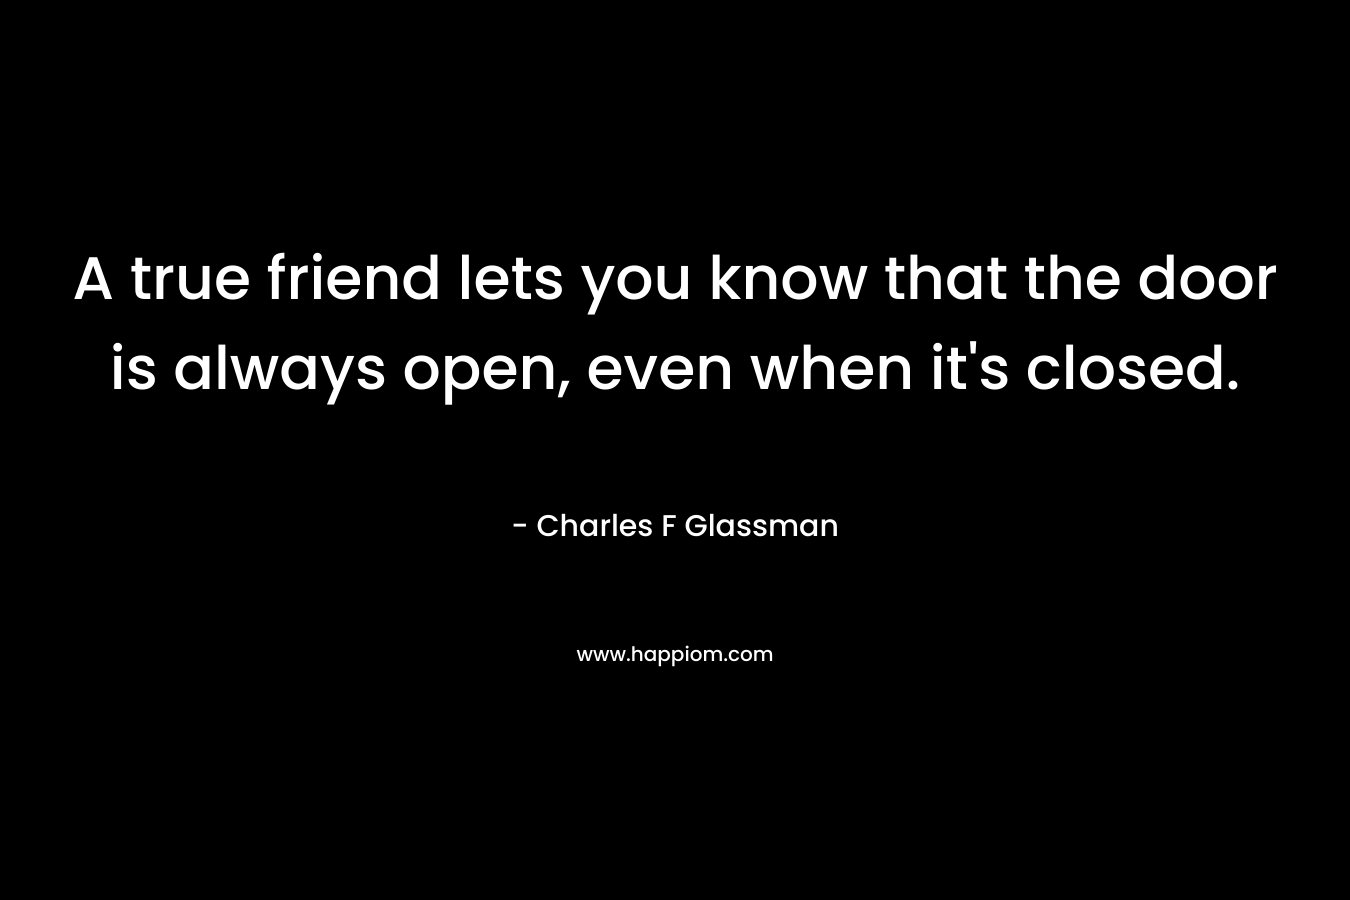 A true friend lets you know that the door is always open, even when it’s closed. – Charles F Glassman